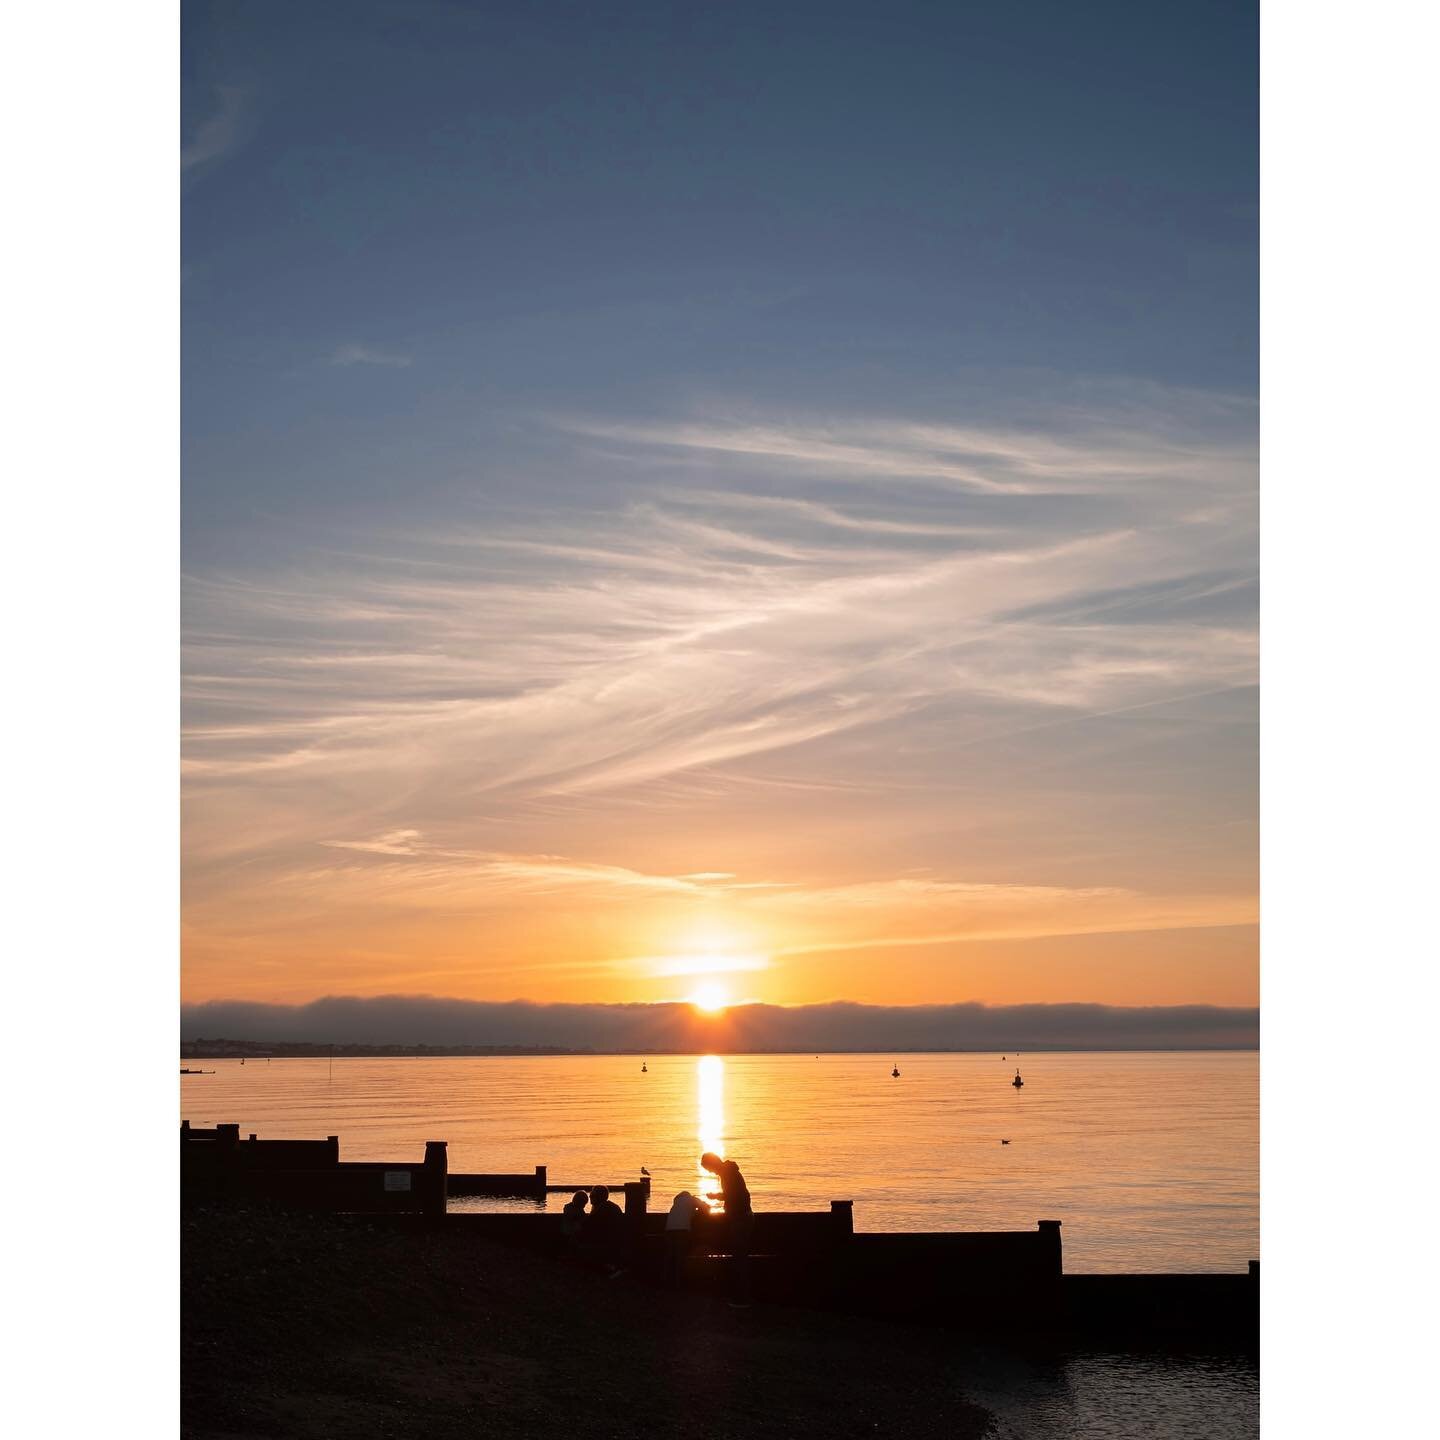 Been a while since I posted a sunset photo on the grid. Here&rsquo;s one from Whitstable (which, for me, is one of the best locations for sunsets in Kent).